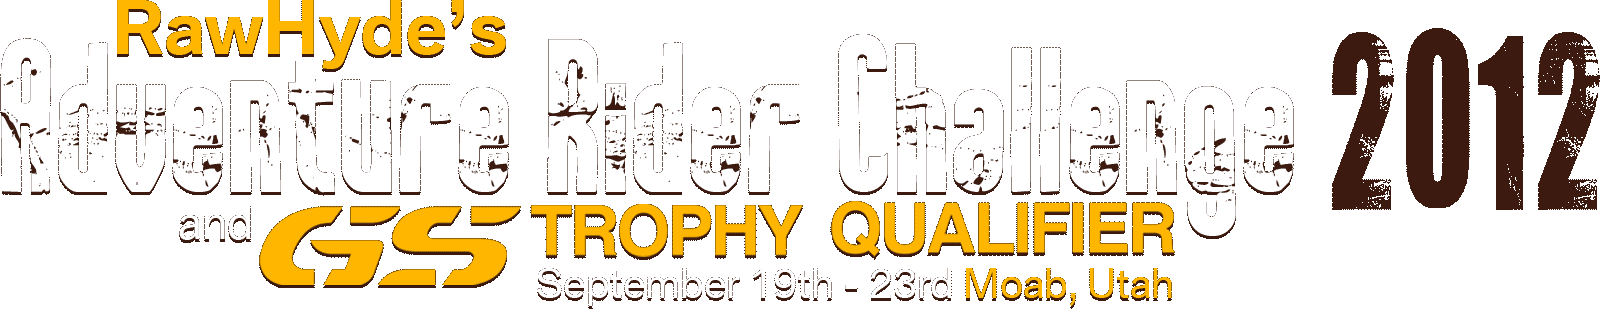 RawHyde's Adventure Rider Challenge & GS Trophy Qualifier - Sept. 19th - 23rd